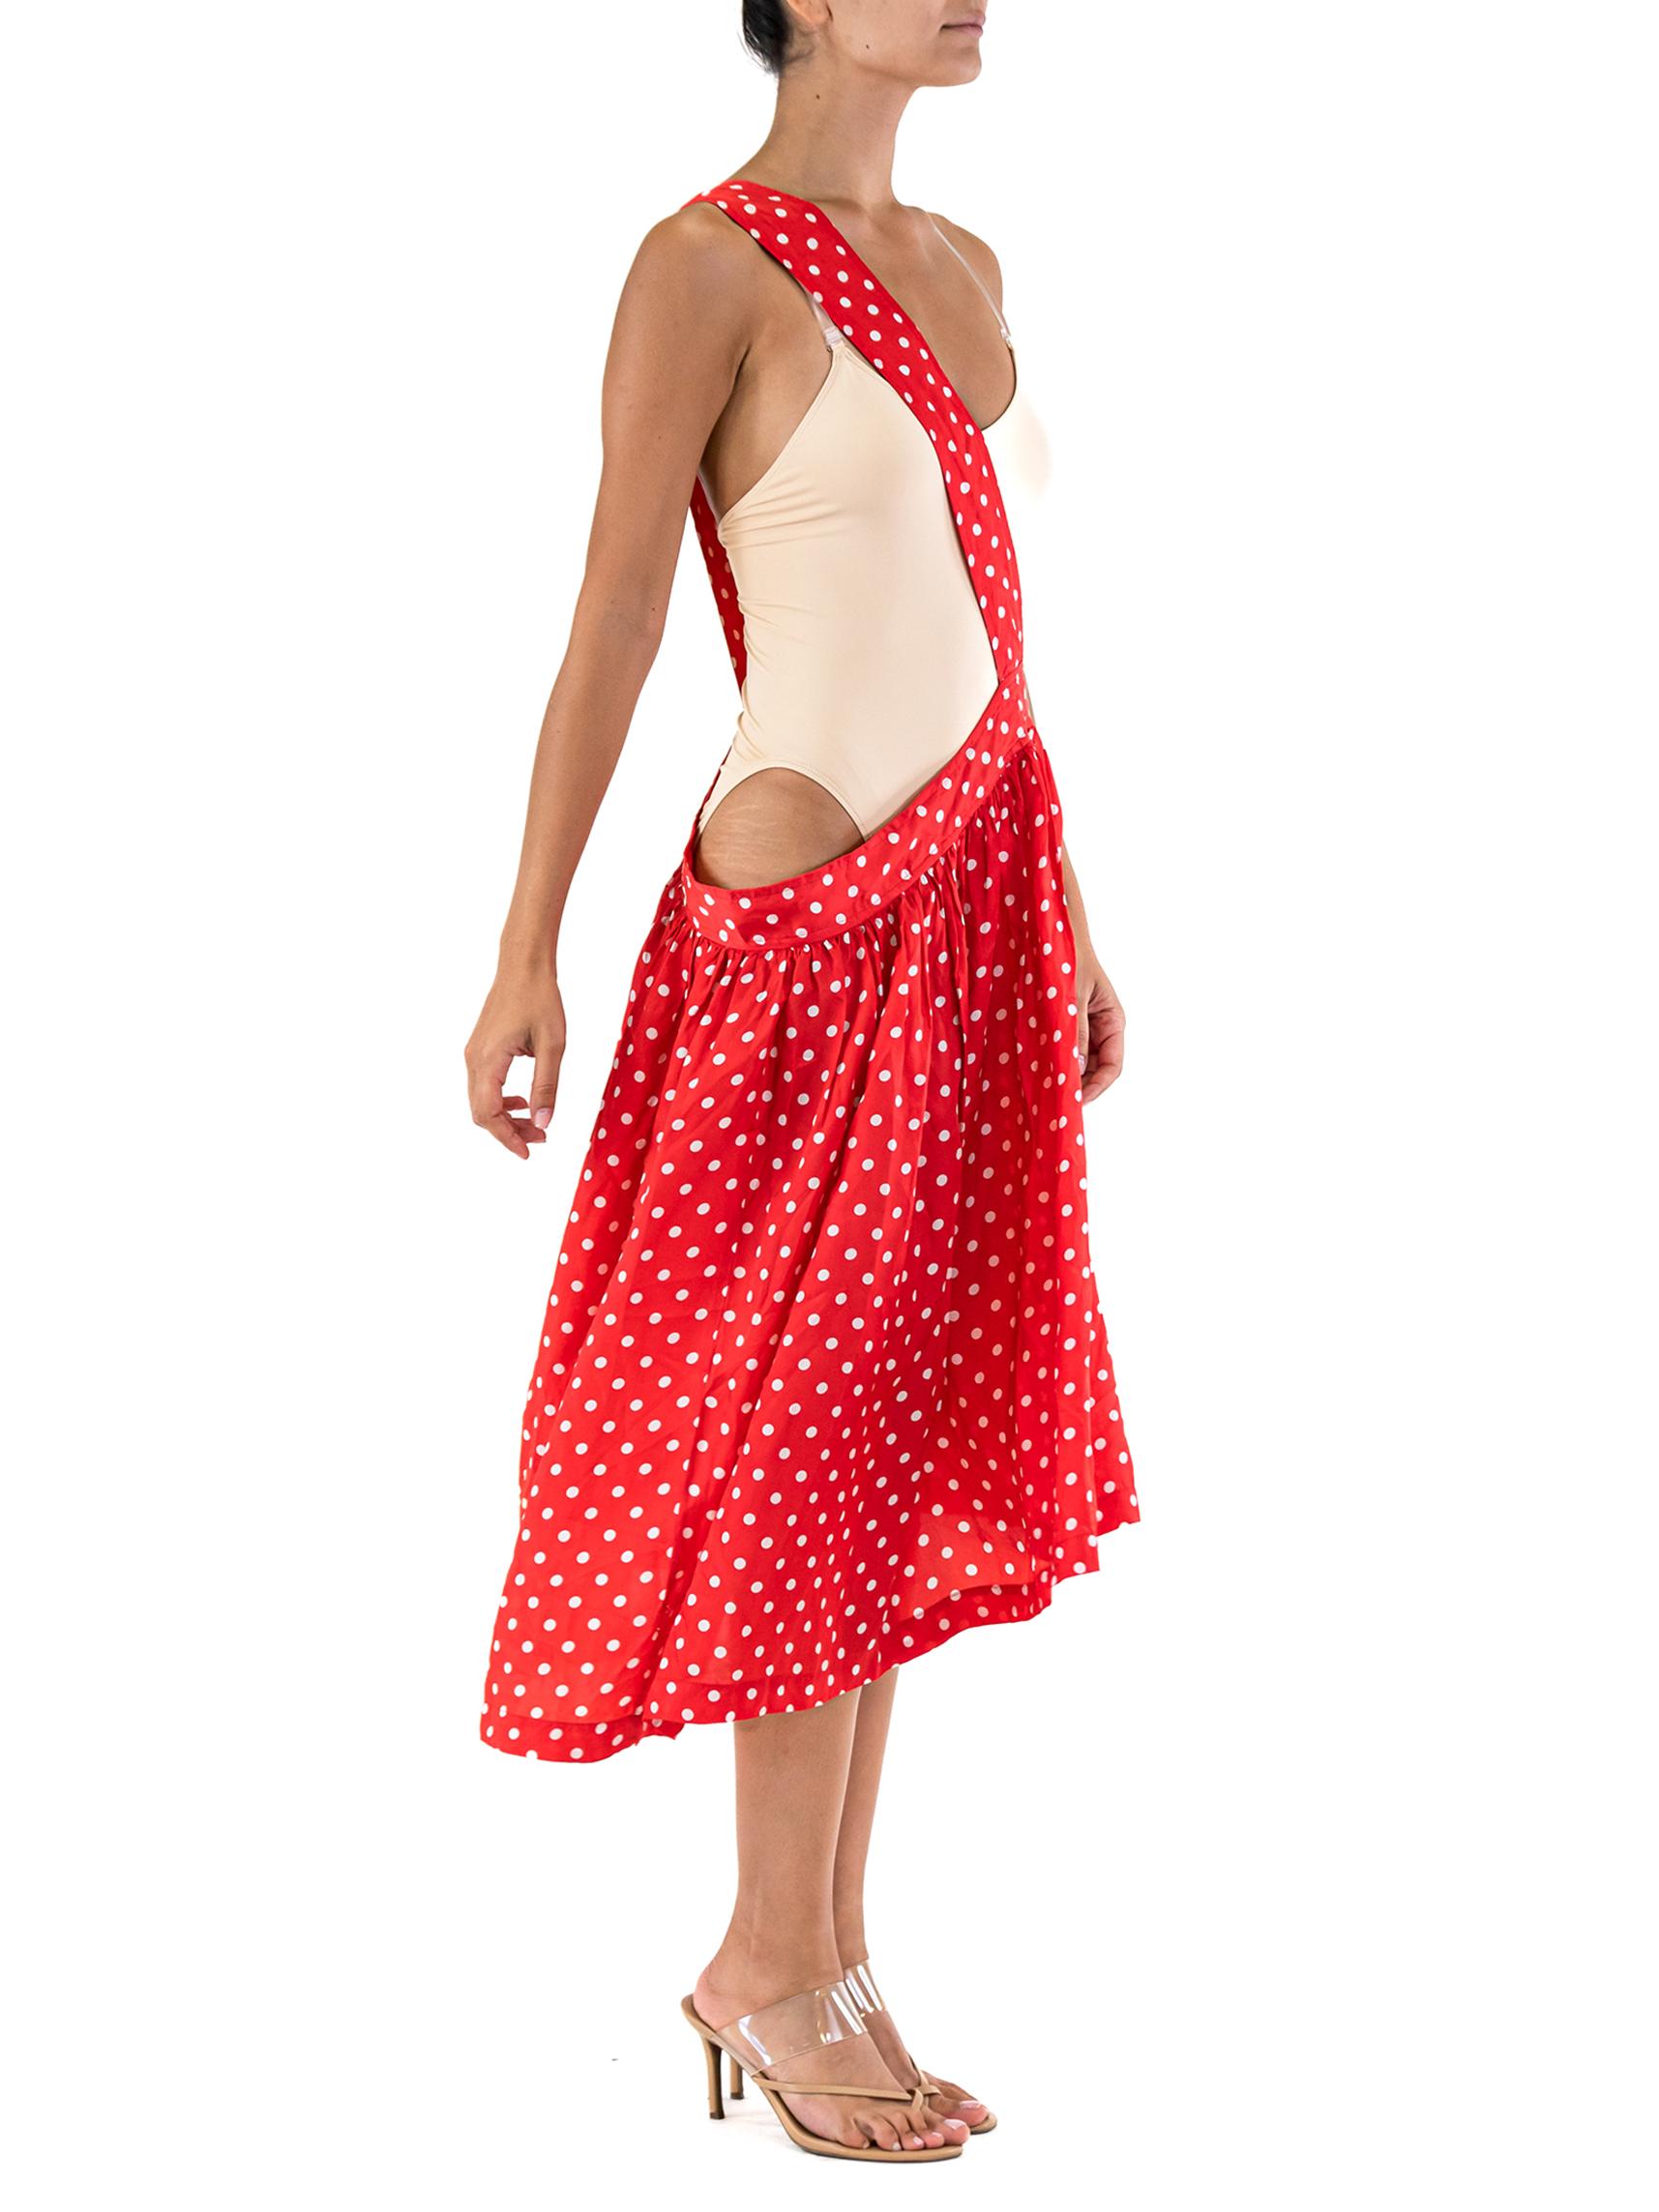 2000S COMME DES GARCONS Red & White Rayon Polka Dot Skirt For Sale 1